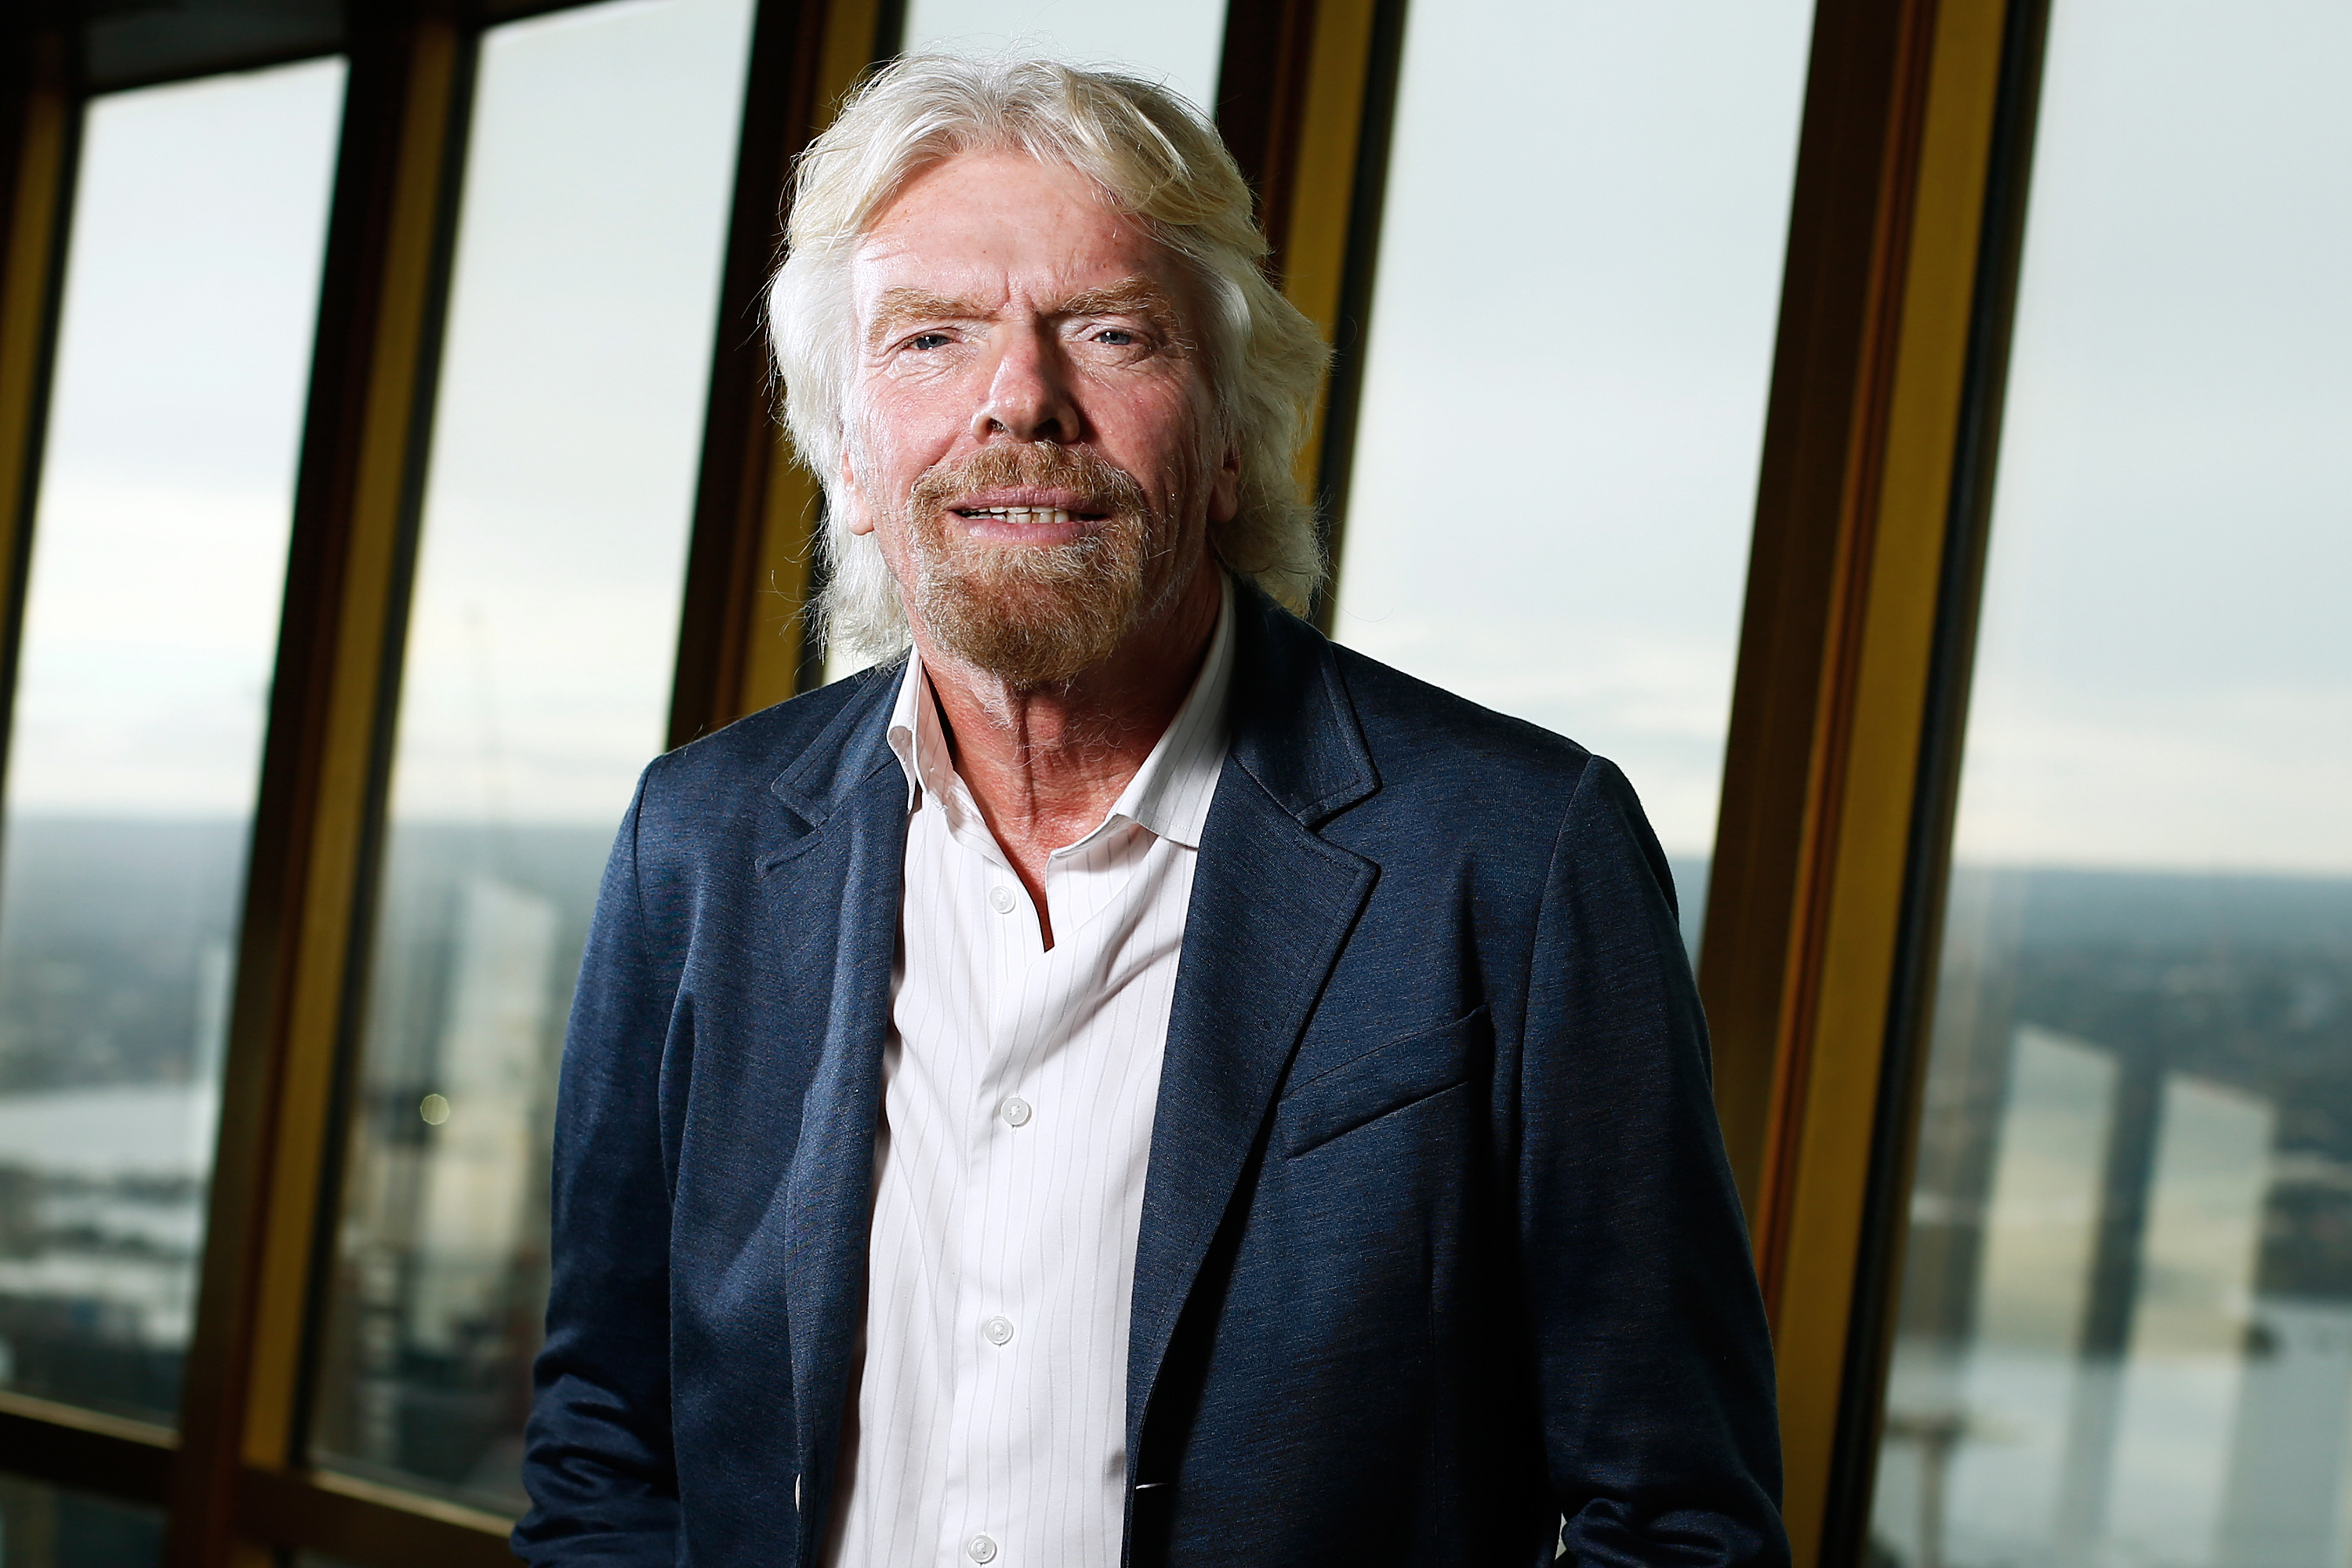 Richard Branson: A Con Artist Scammed My Friend Out of $2 Million by Pretending to Be Me